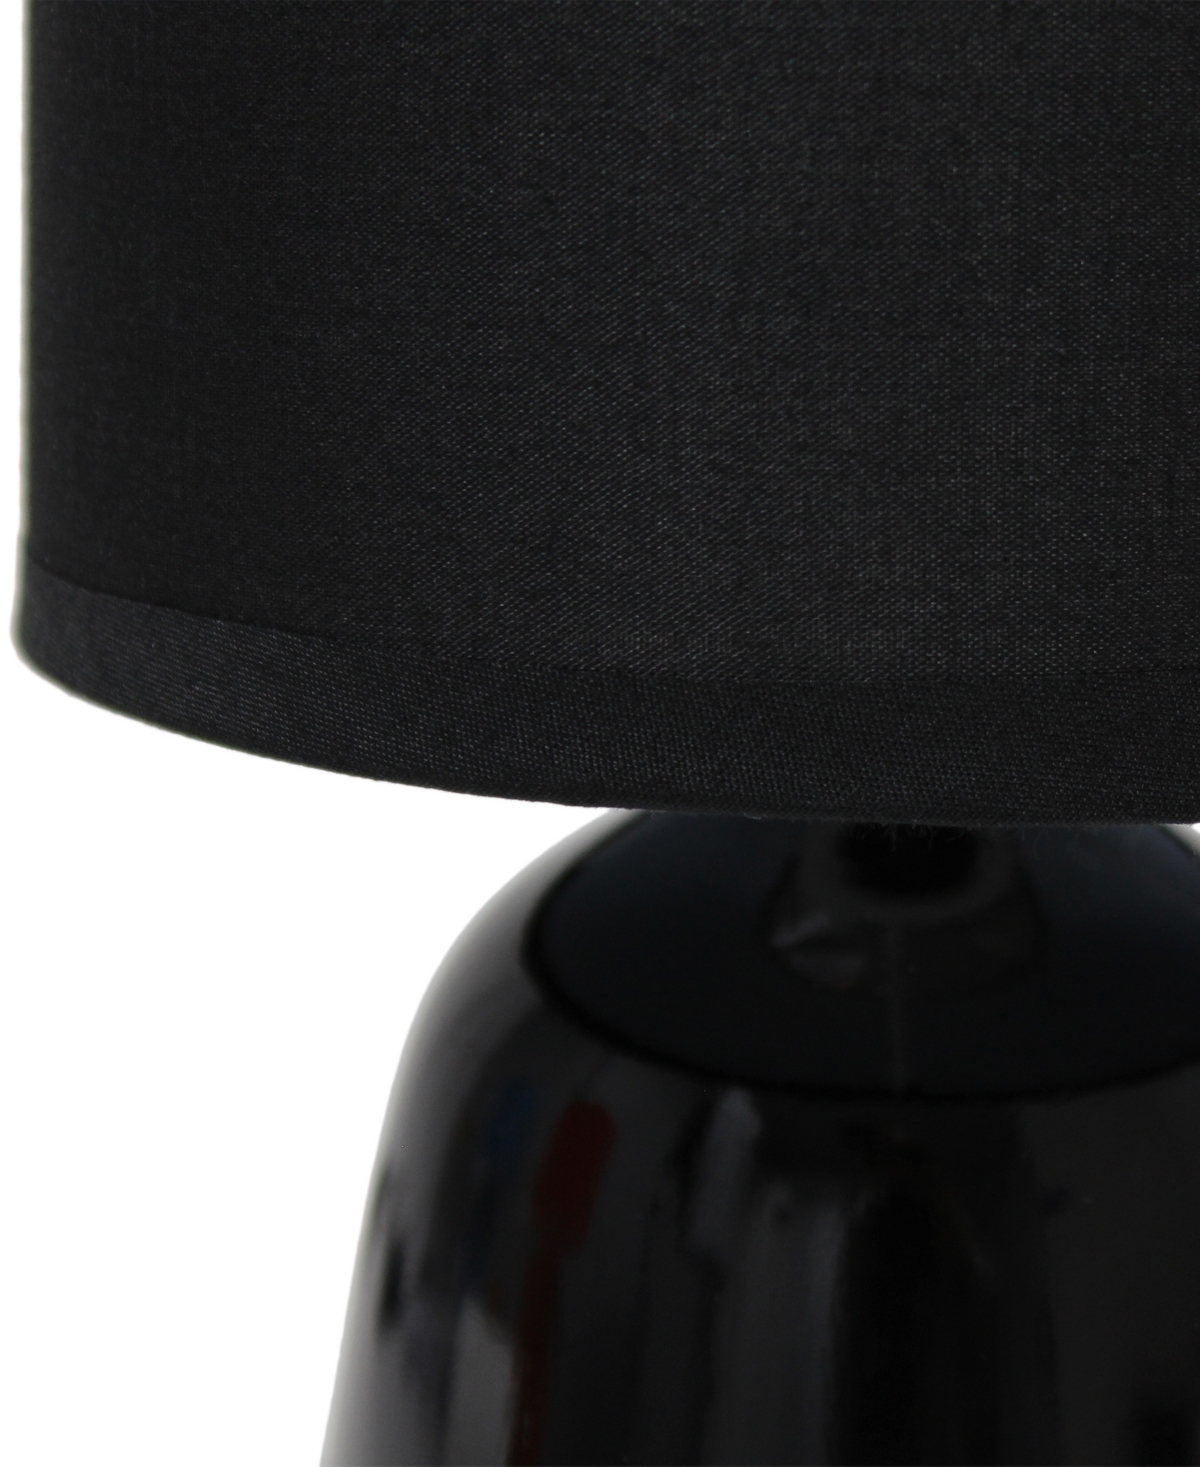 Shop Simple Designs 10.04" Tall Traditional Ceramic Thimble Base Bedside Table Desk Lamp With Matching Fabric Shade In Black